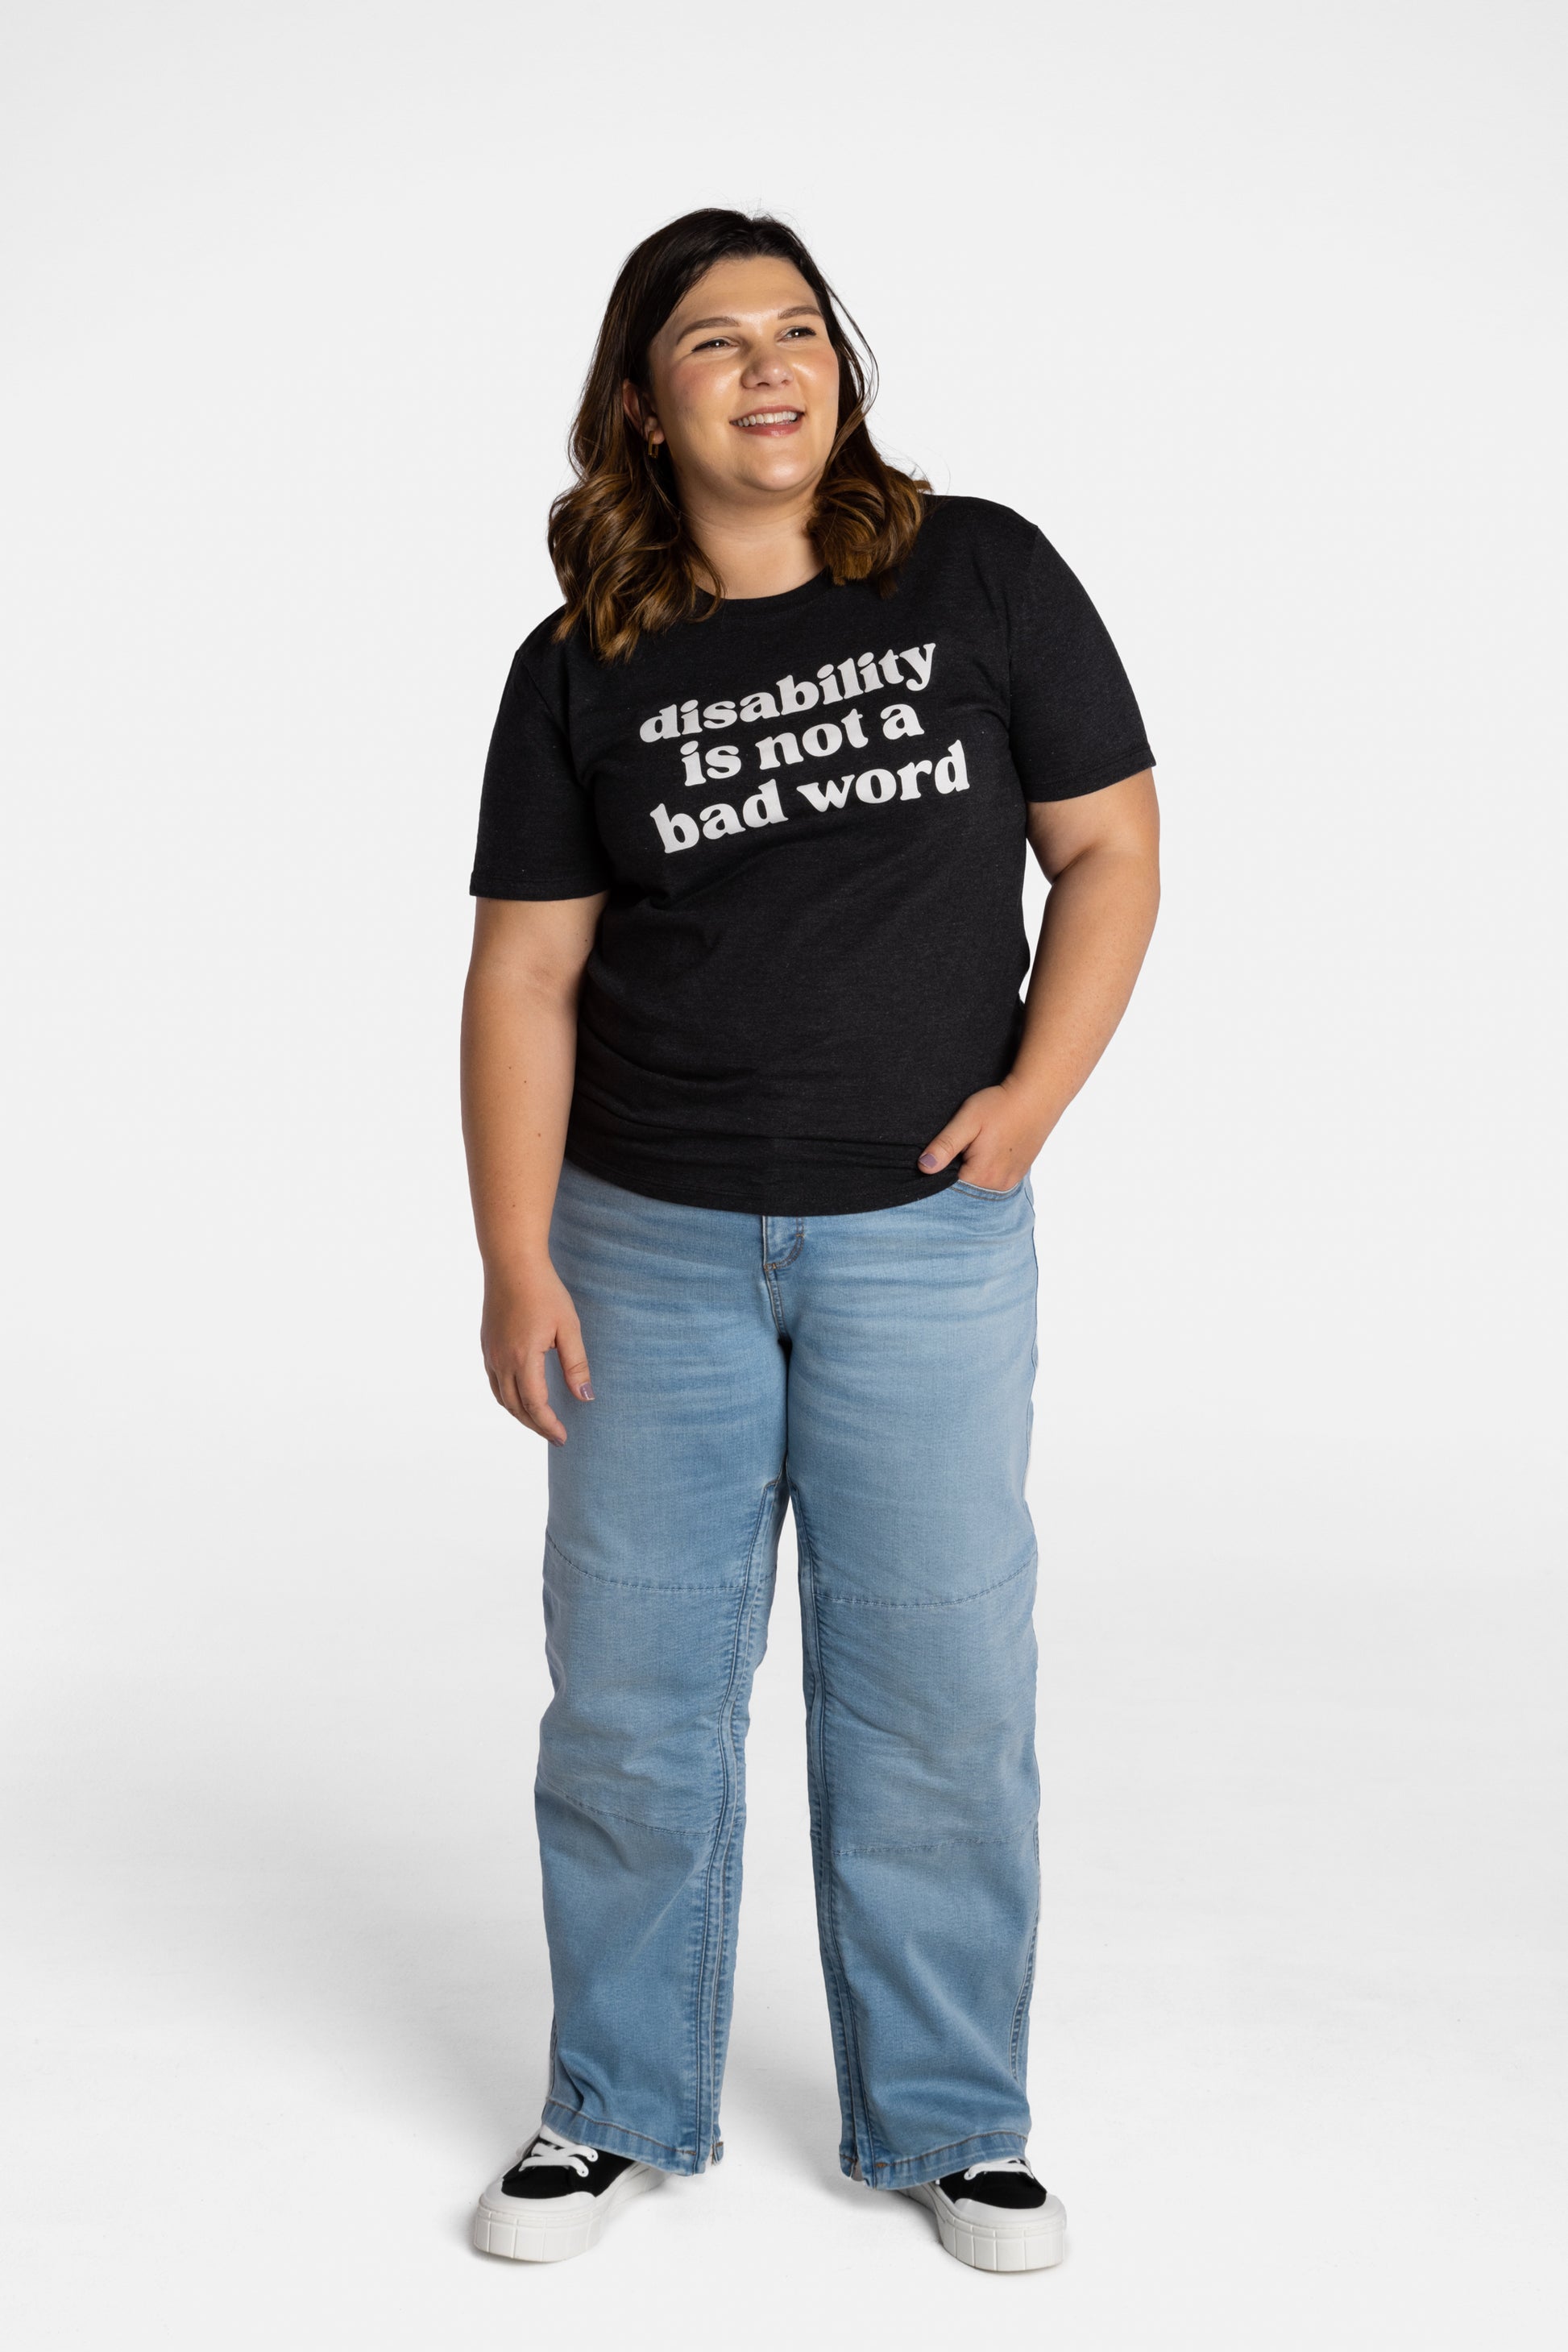 Erica Cole, the founder of No Limbits, wears the No Limbits Adaptive Women's Light Wash Unlimbited Pants. She's wearing the black "disability is not a bad word" T-shirt.